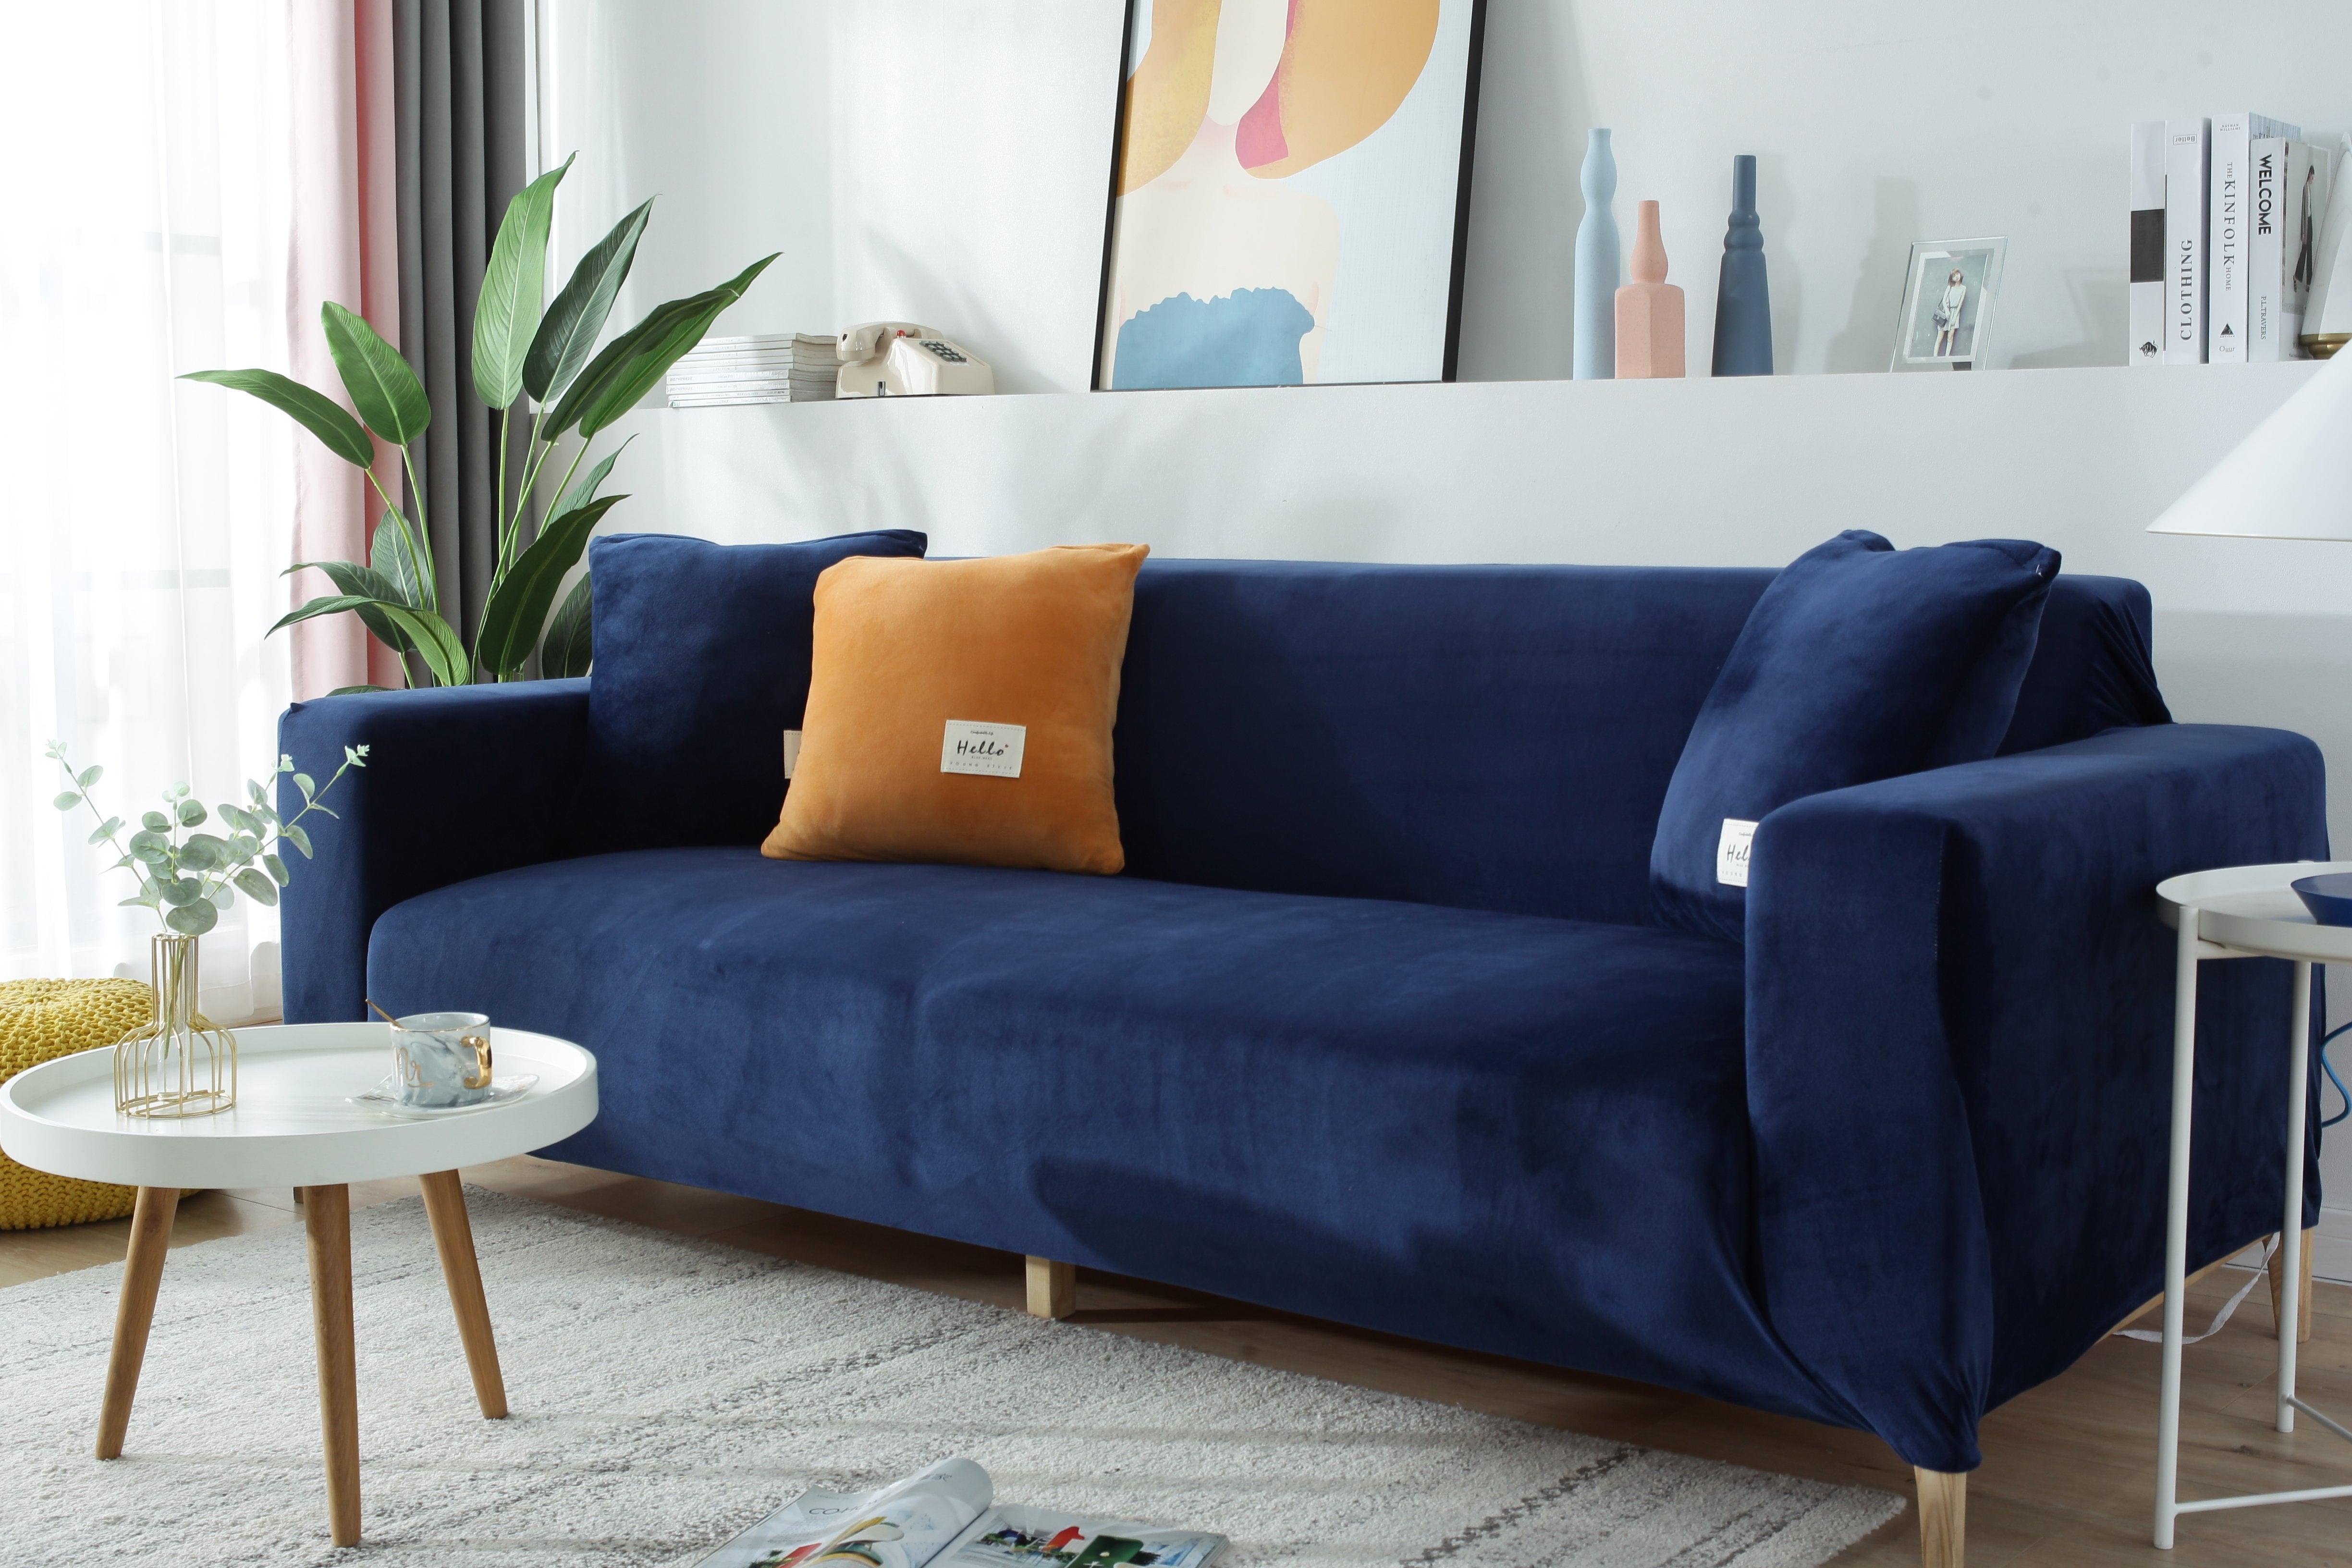 Sofa Cover - Velvet - Navy blue - Adaptable & Expandable - The Sofa Cover Crafter